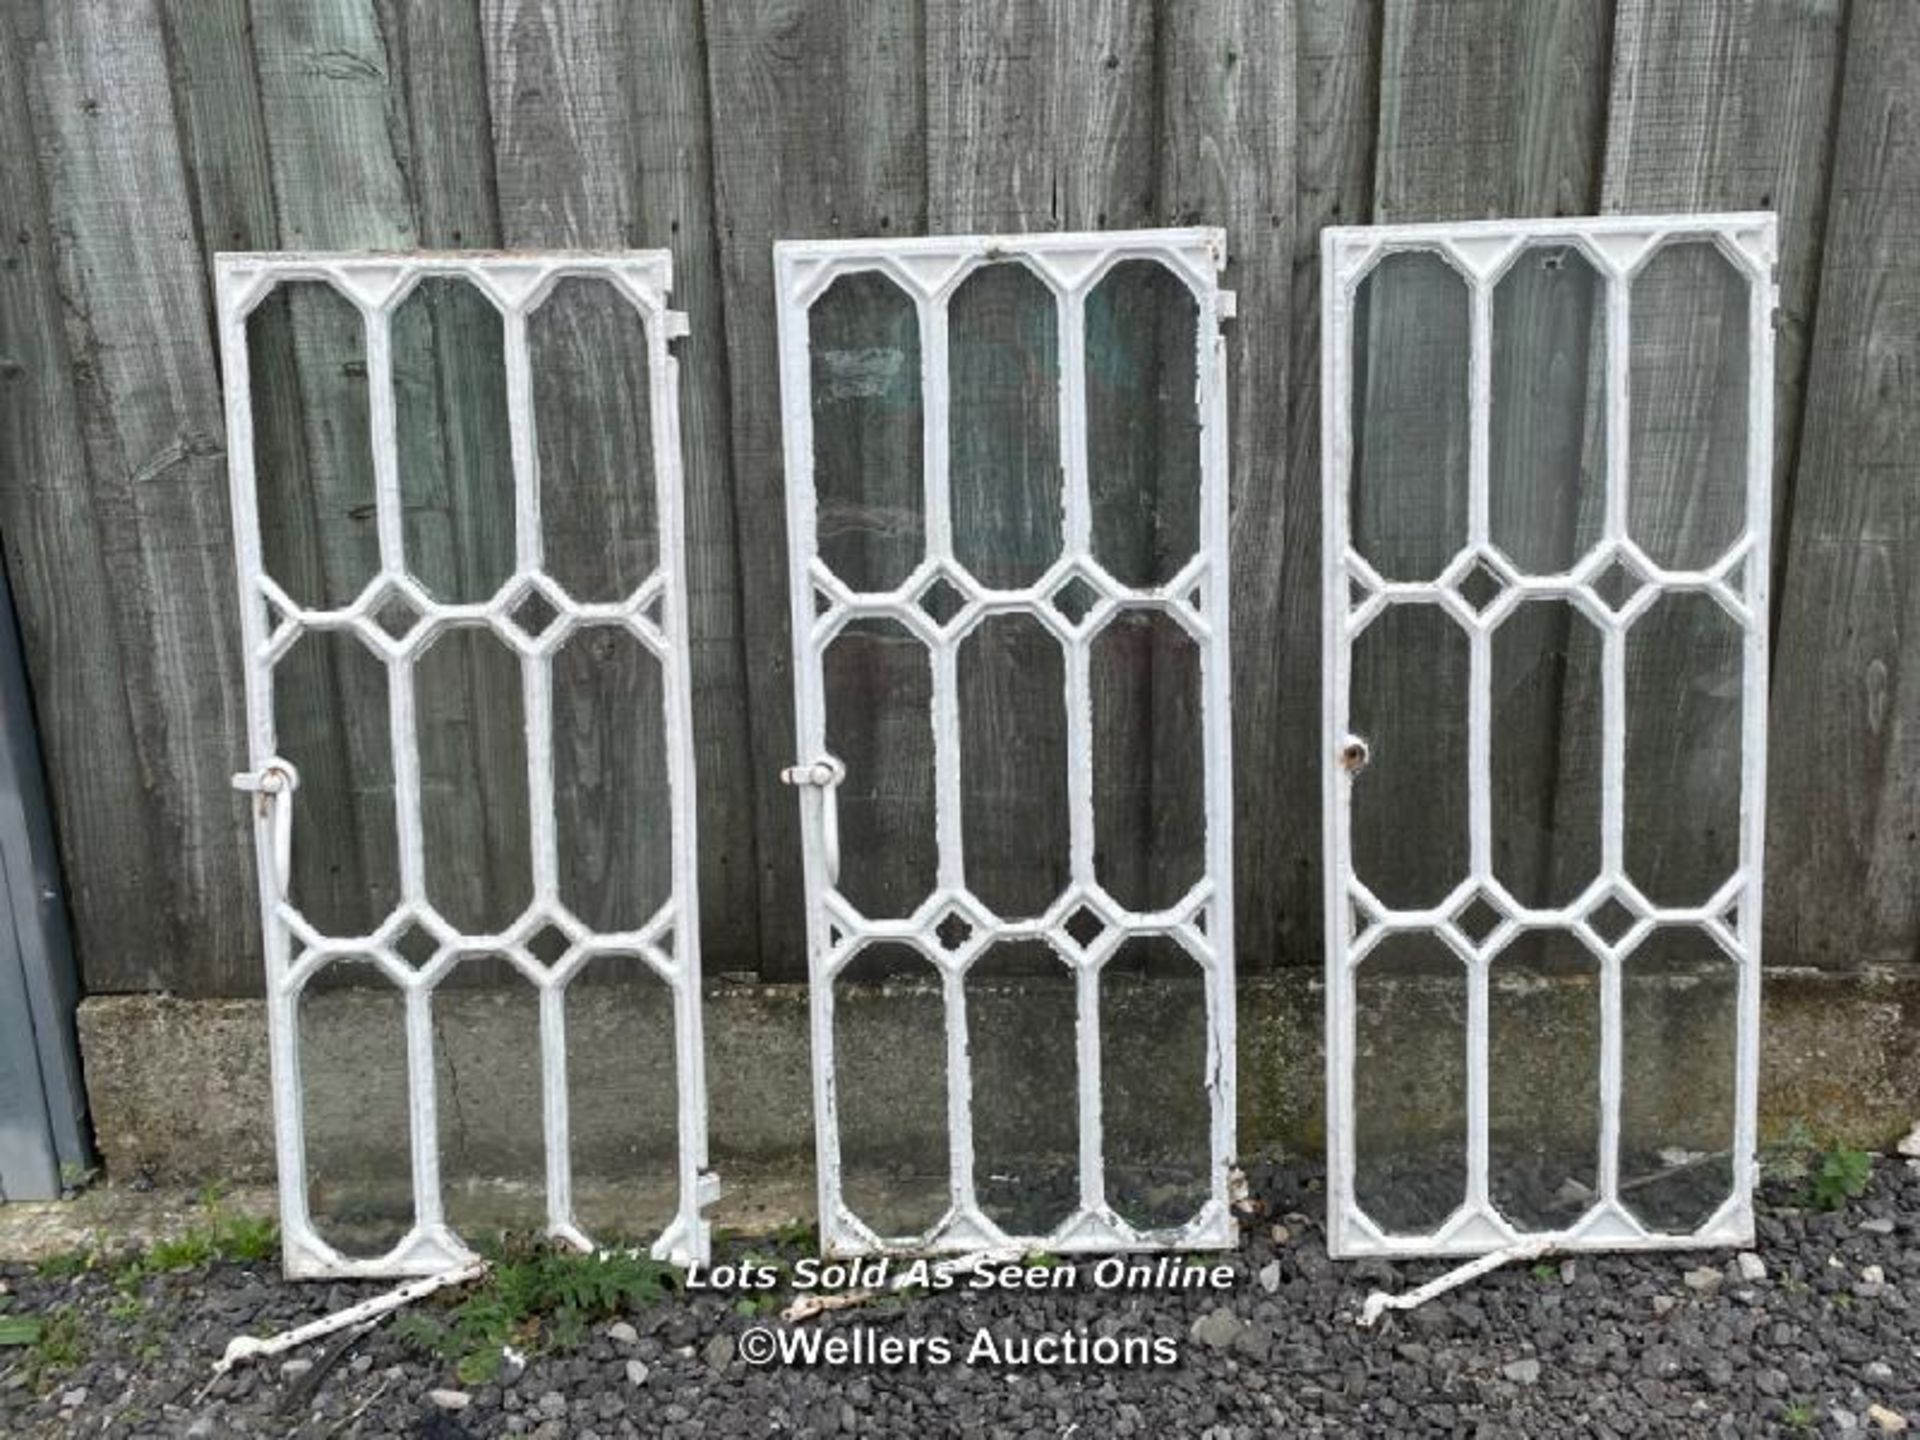 3 cast iron windows for restoration. Circa 1870 from Canning works Finchdean. 46cm by 113cm each.